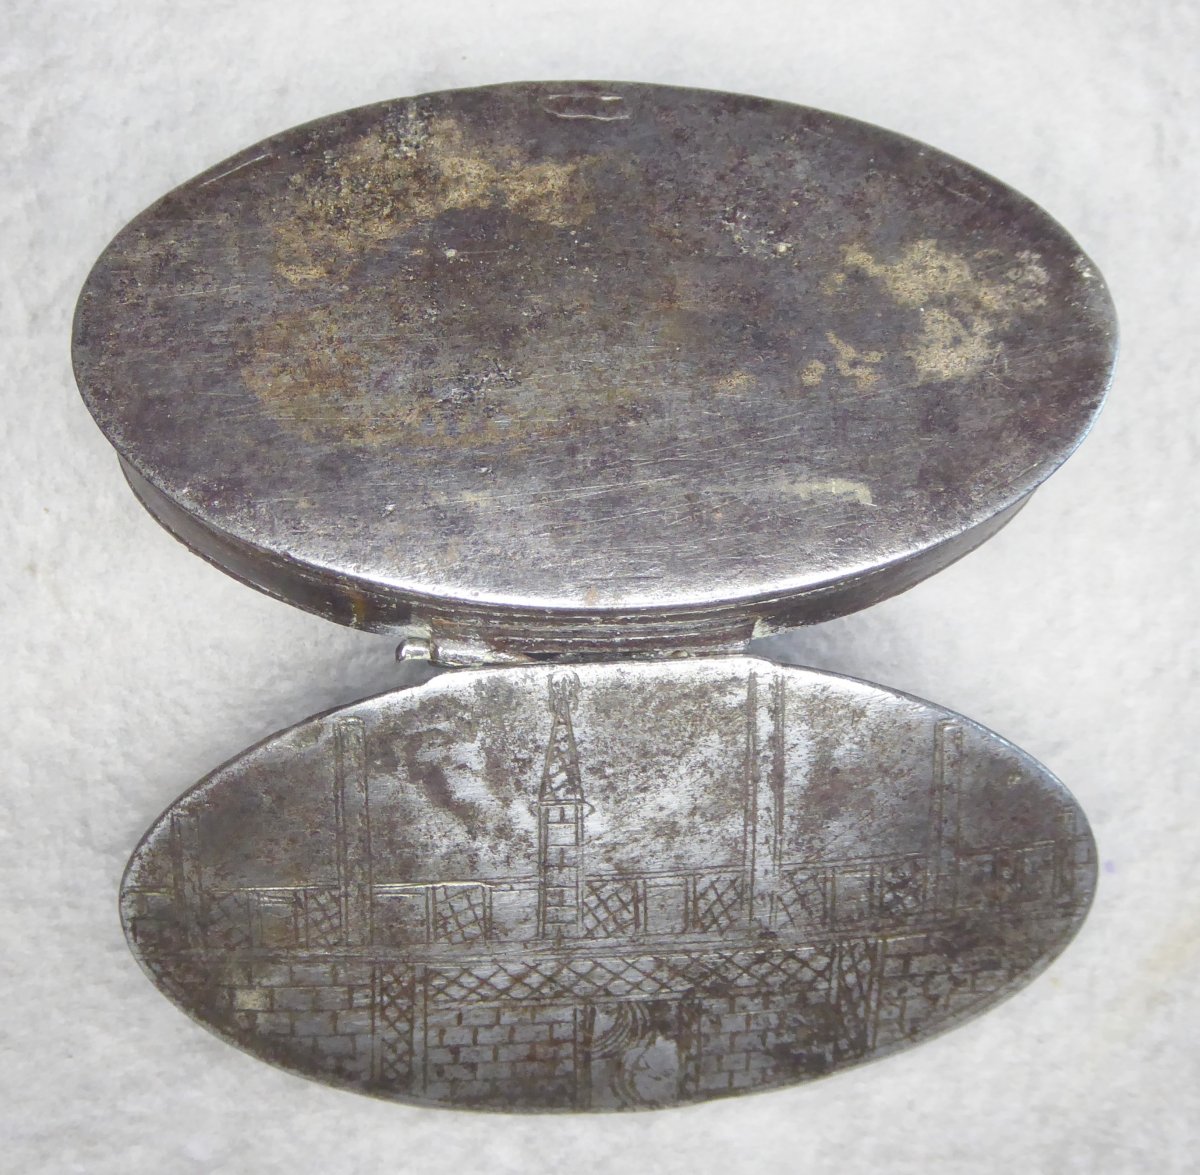 Engraved Iron Oval Box, Russia? Early 18th Century: St Petersburg?-photo-2